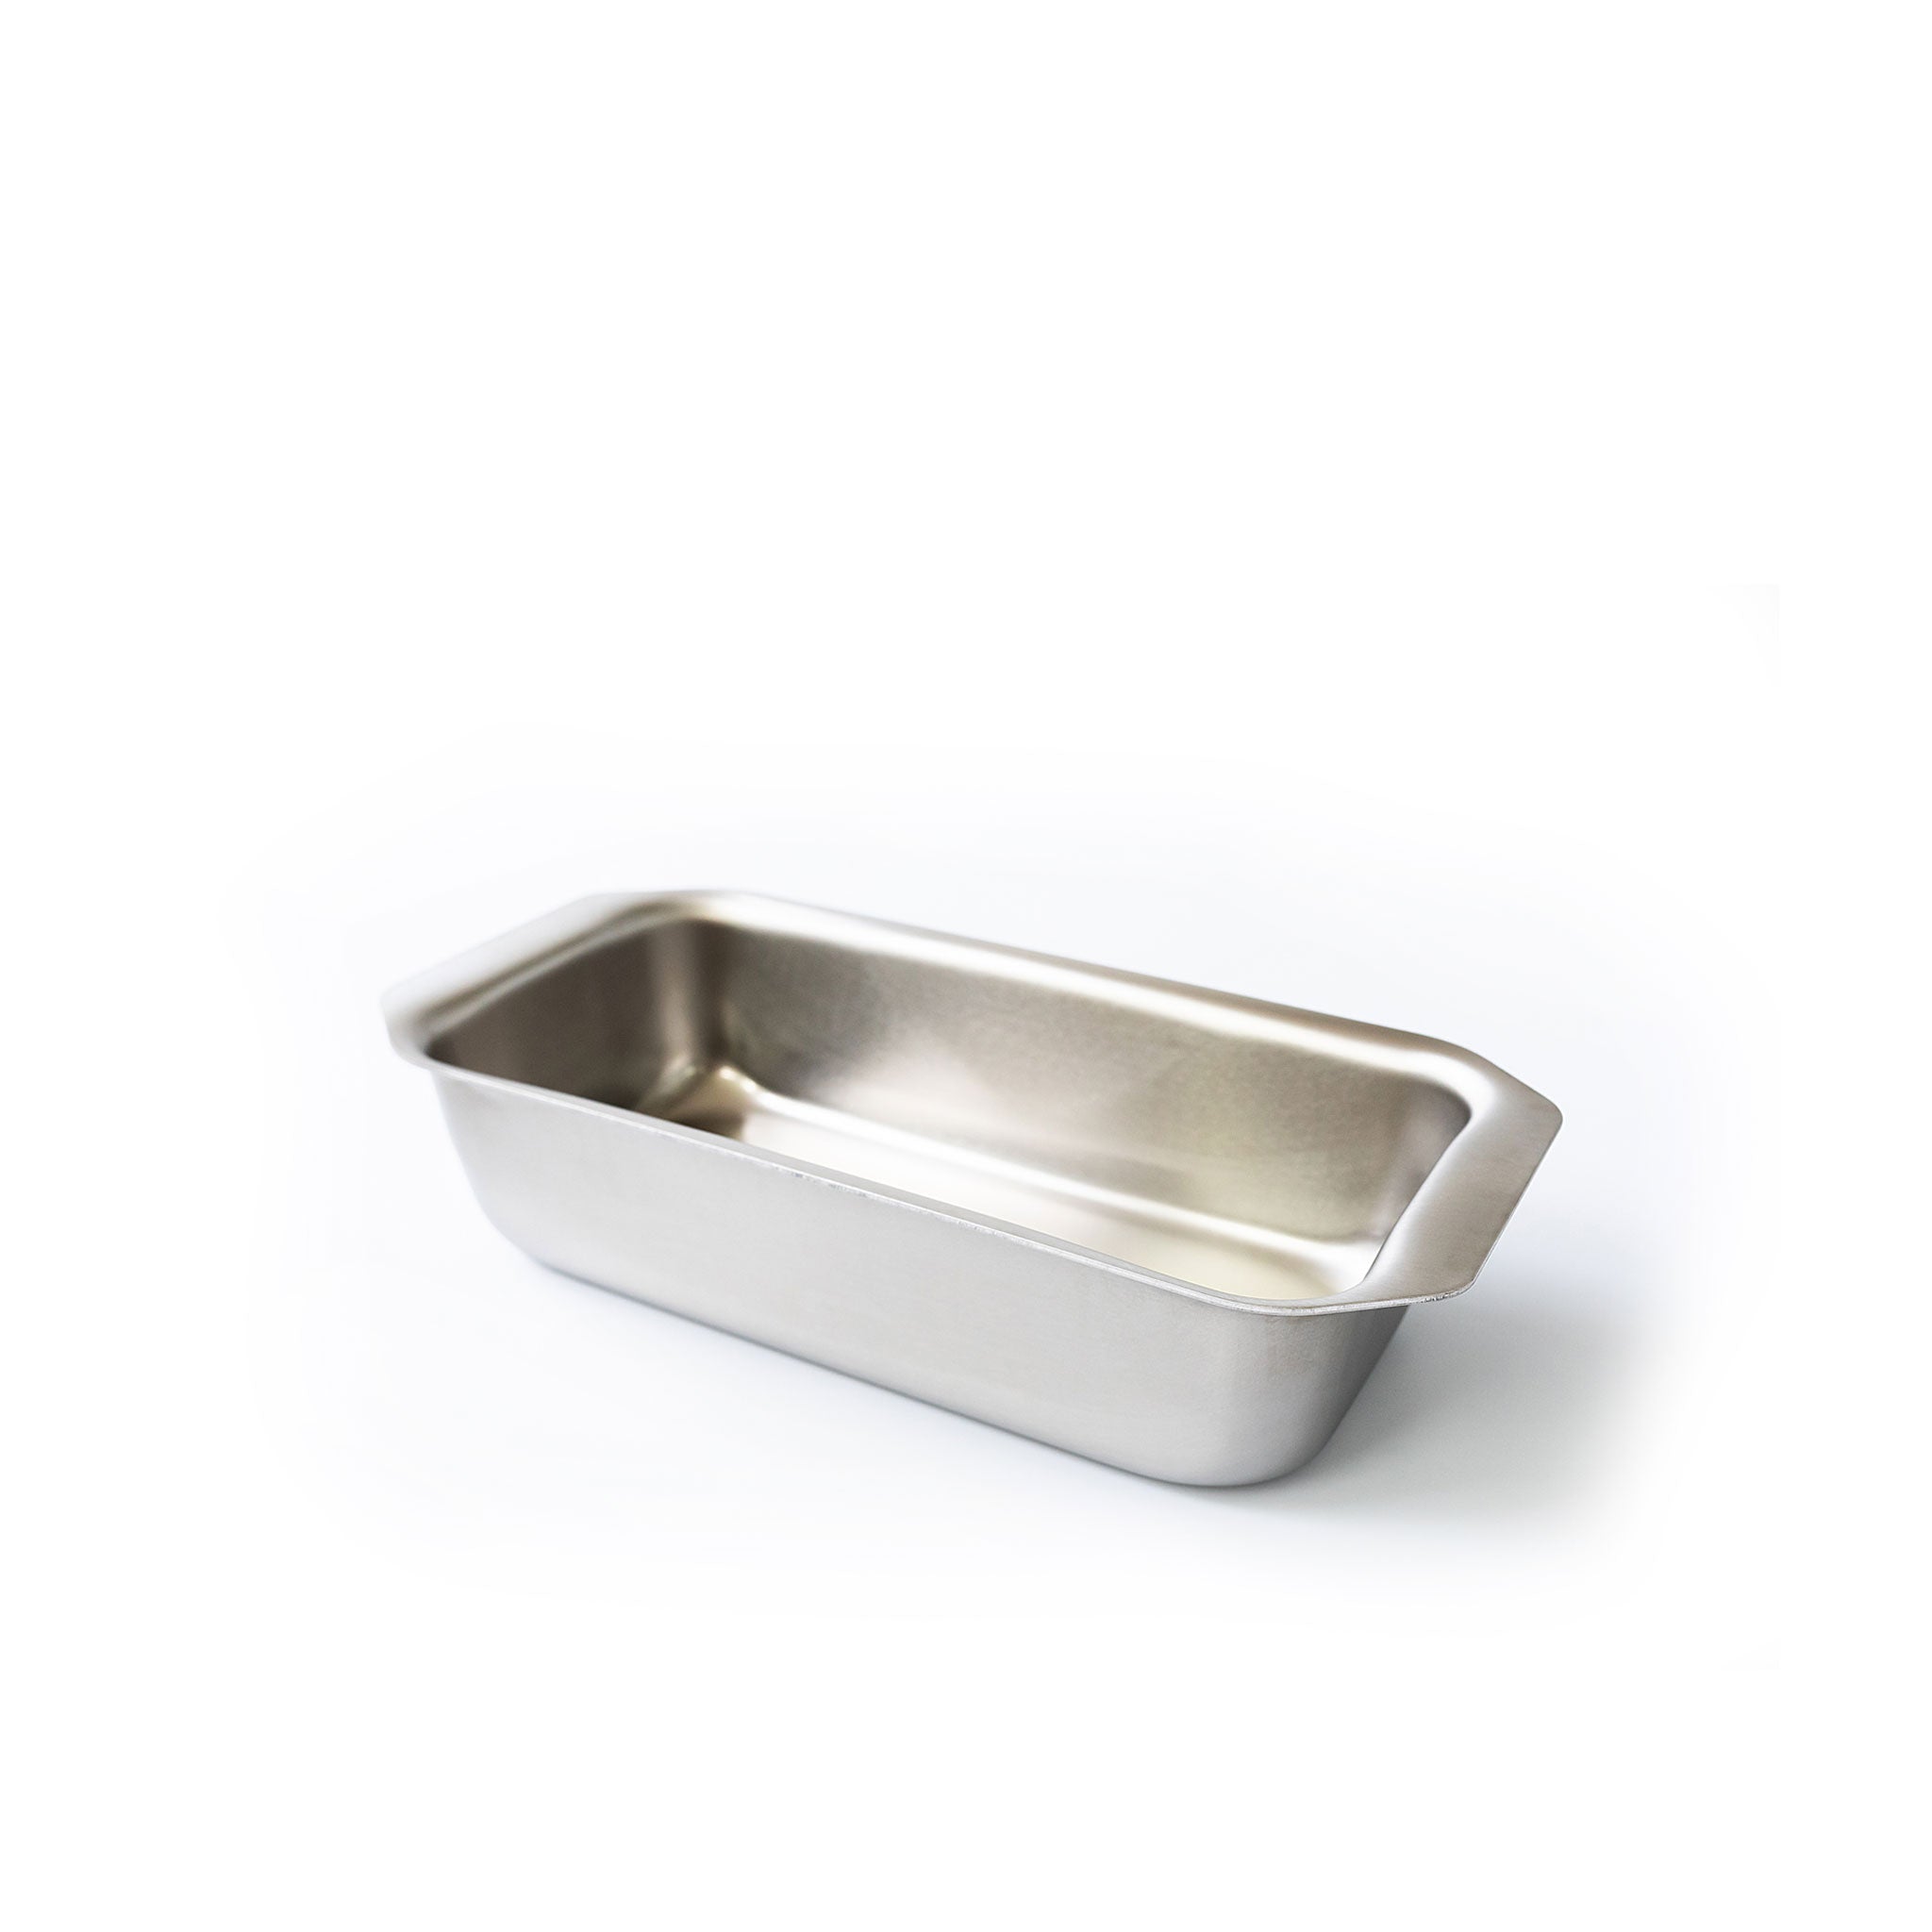 360 Stainless Steel Baking Pan 9X13, Handcrafted in the USA, 5 Ply